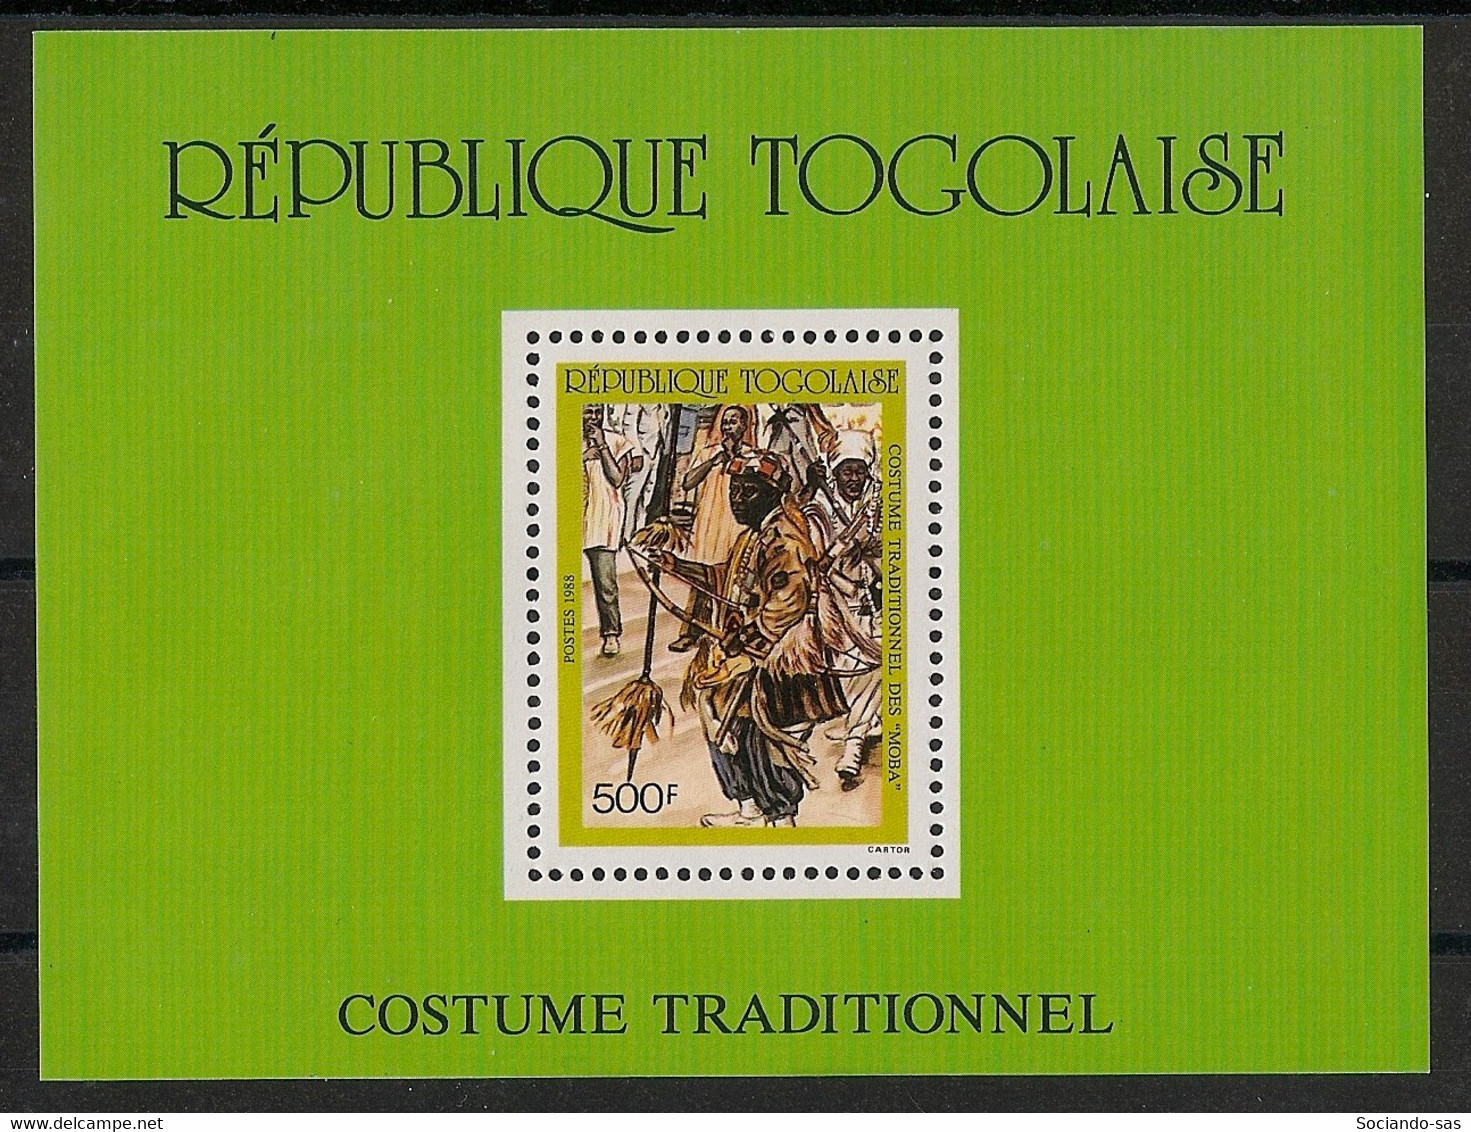 TOGO - 1988 - Bloc Feuillet BF N°YT. 273 - Costumes Traditionnels - Neuf Luxe ** / MNH / Postfrisch - Togo (1960-...)